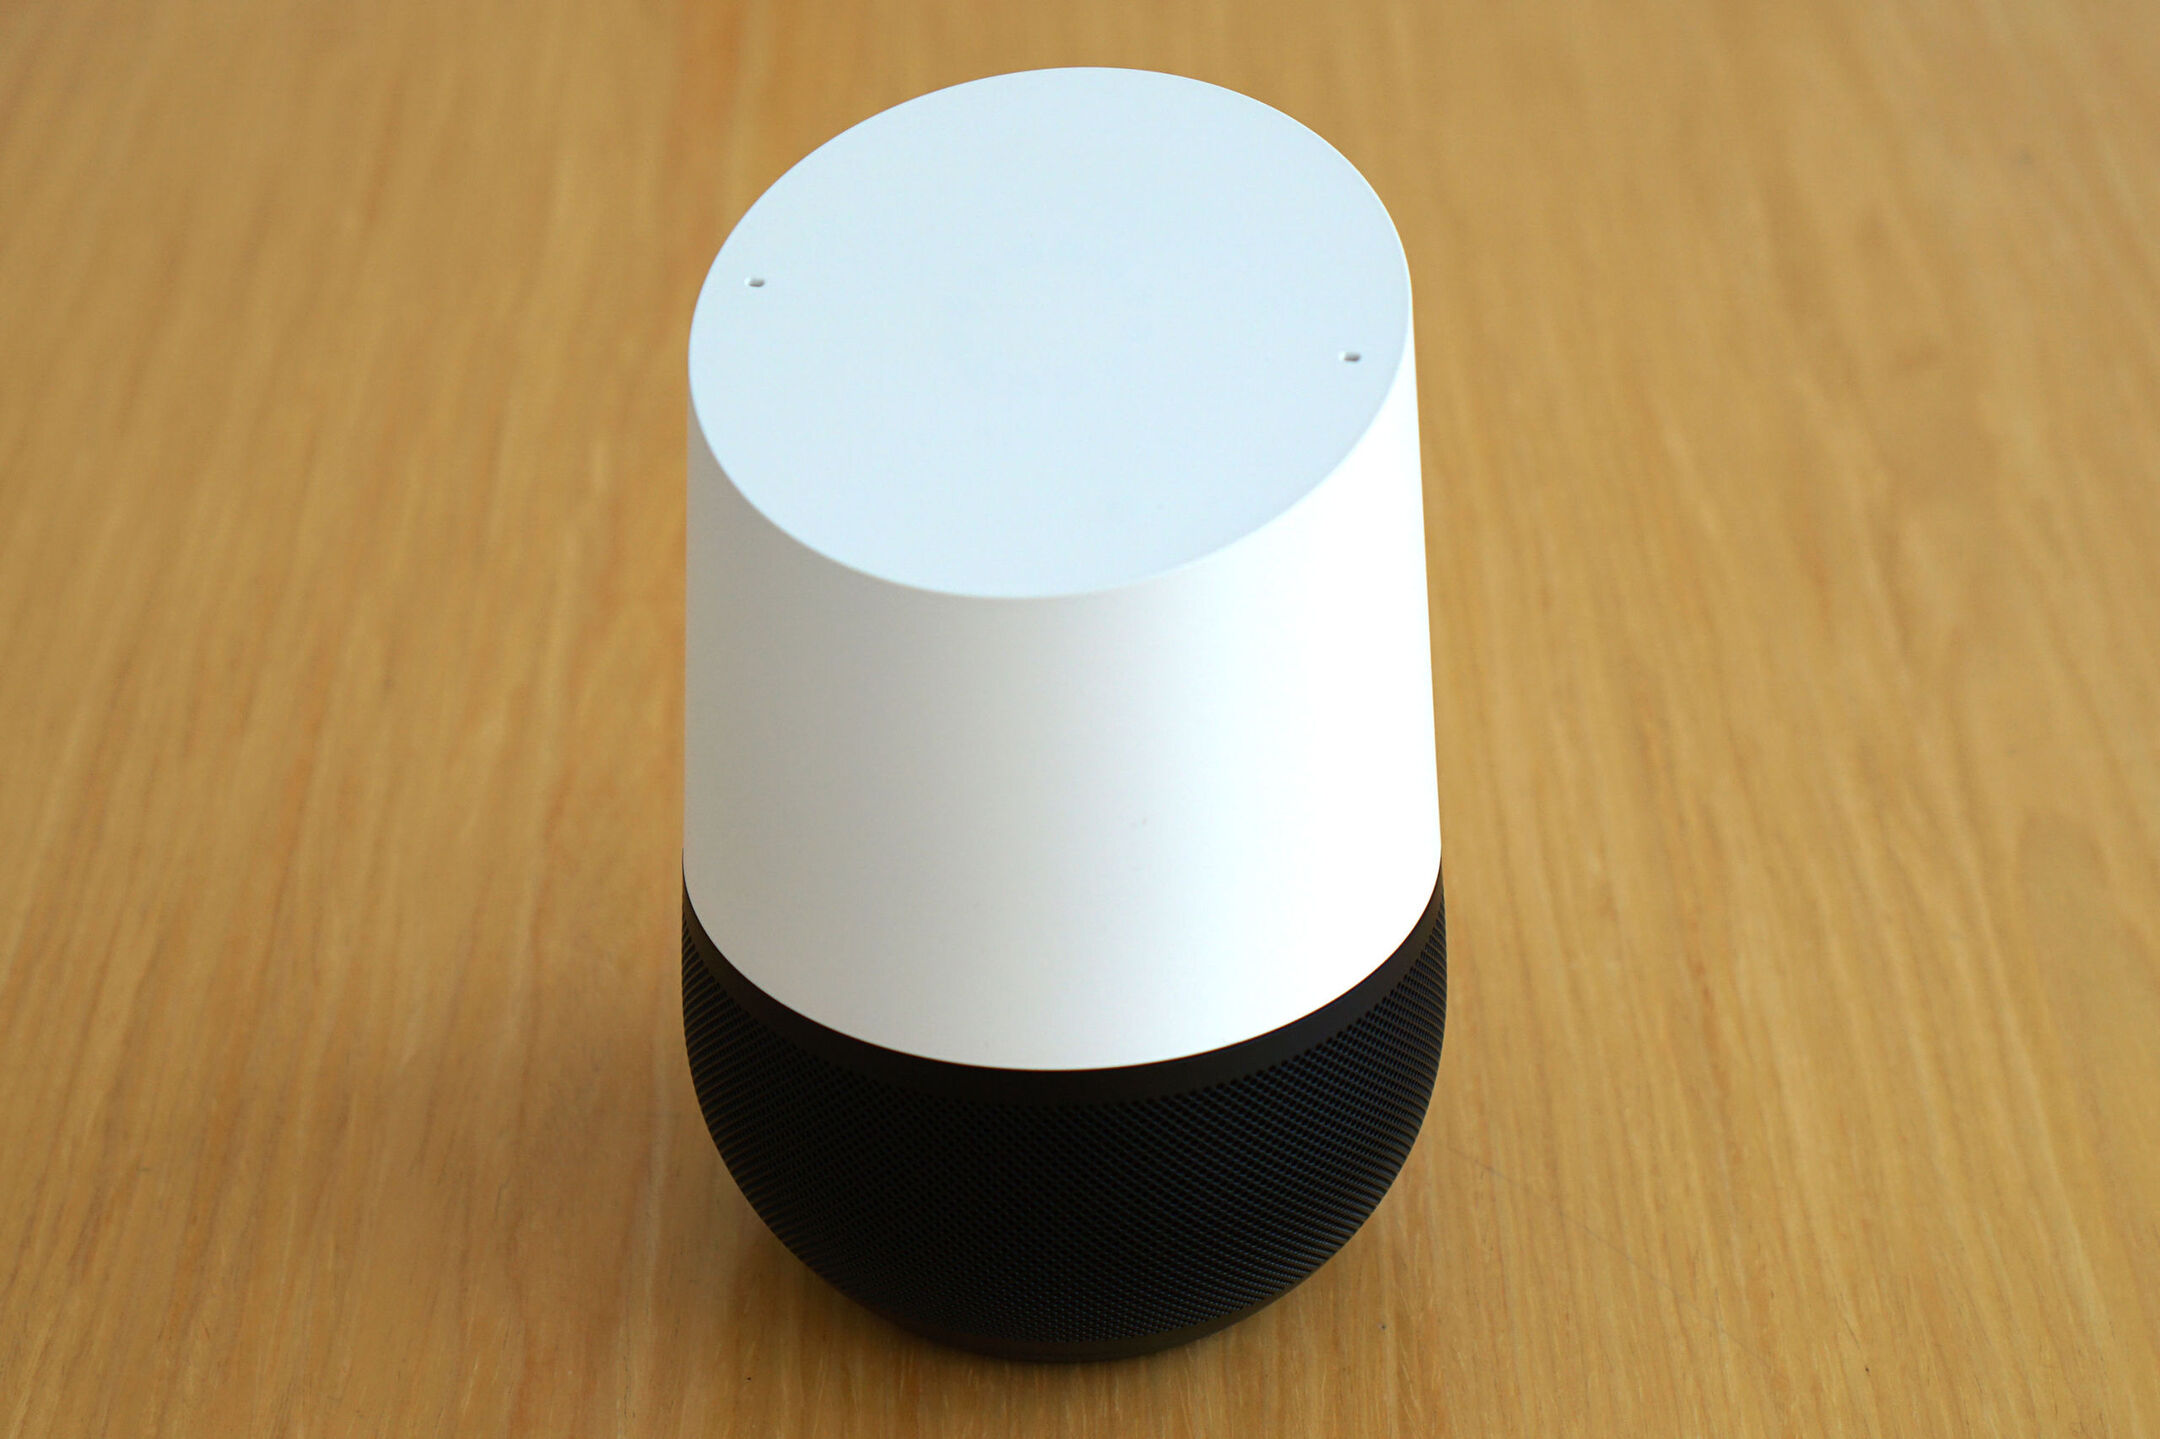 How To Connect To Google Home